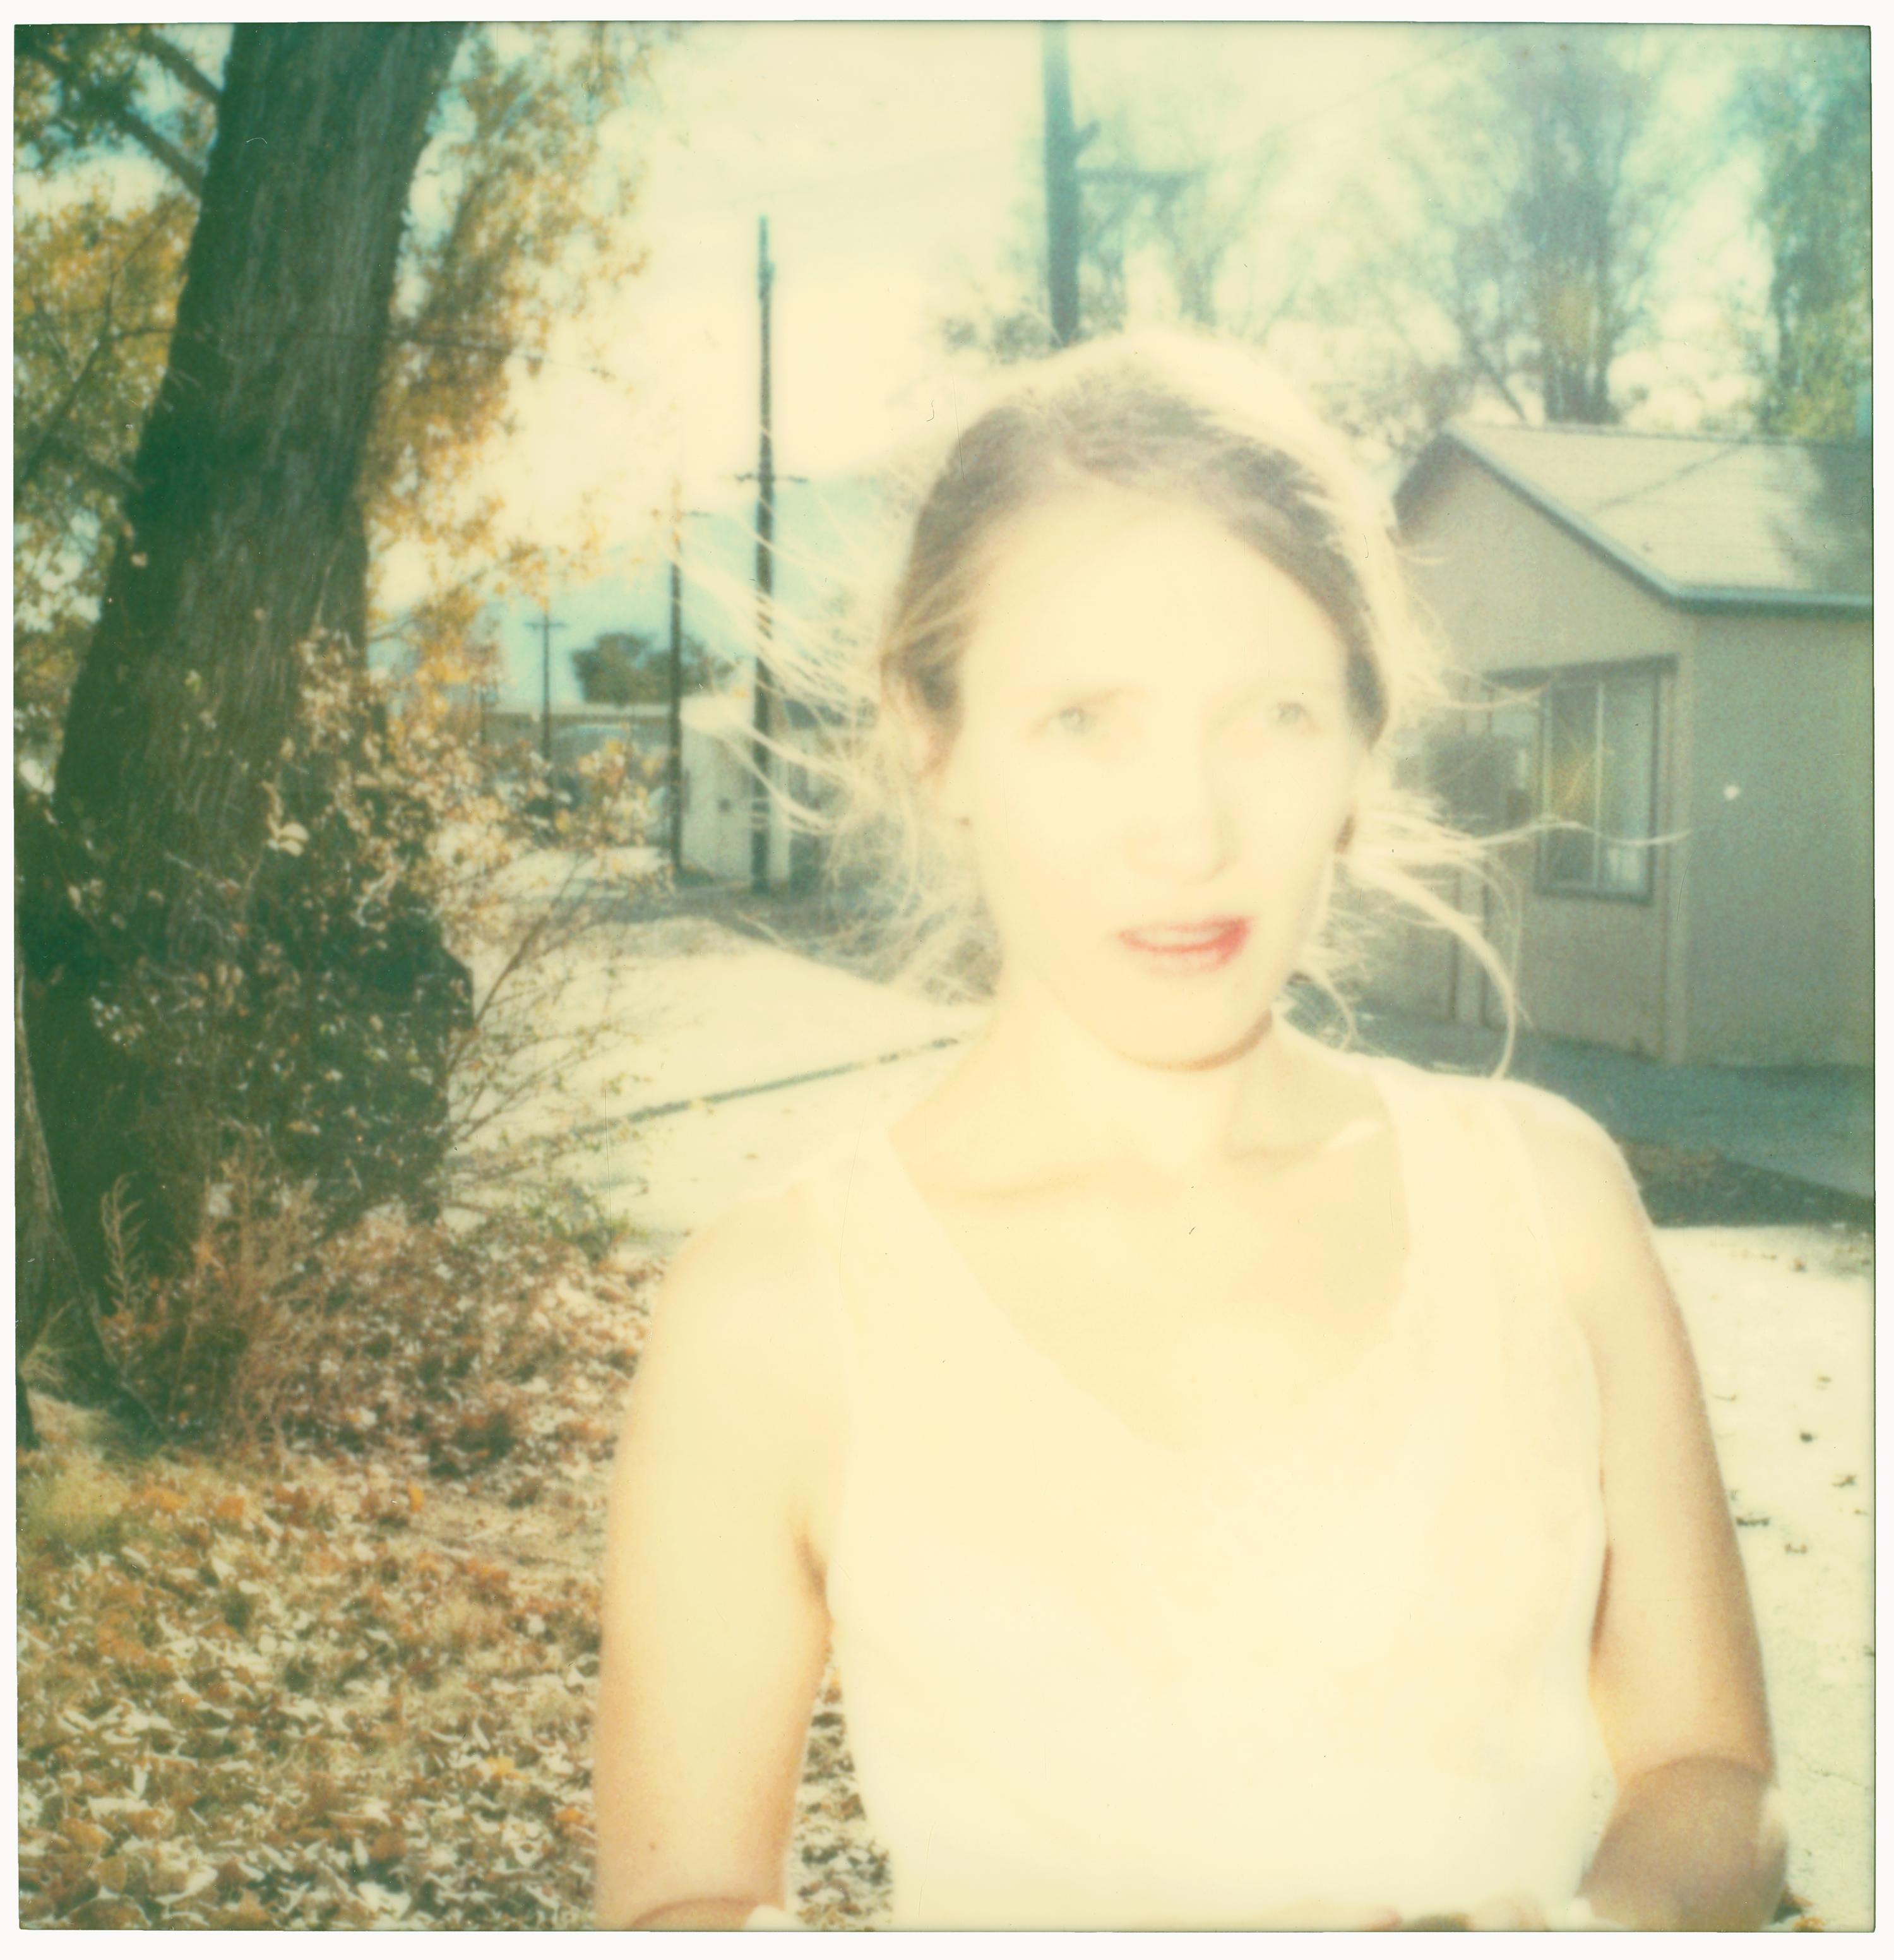 Back Alley II (The Last Picture Show) - 21e siècle, Polaroid, couleur